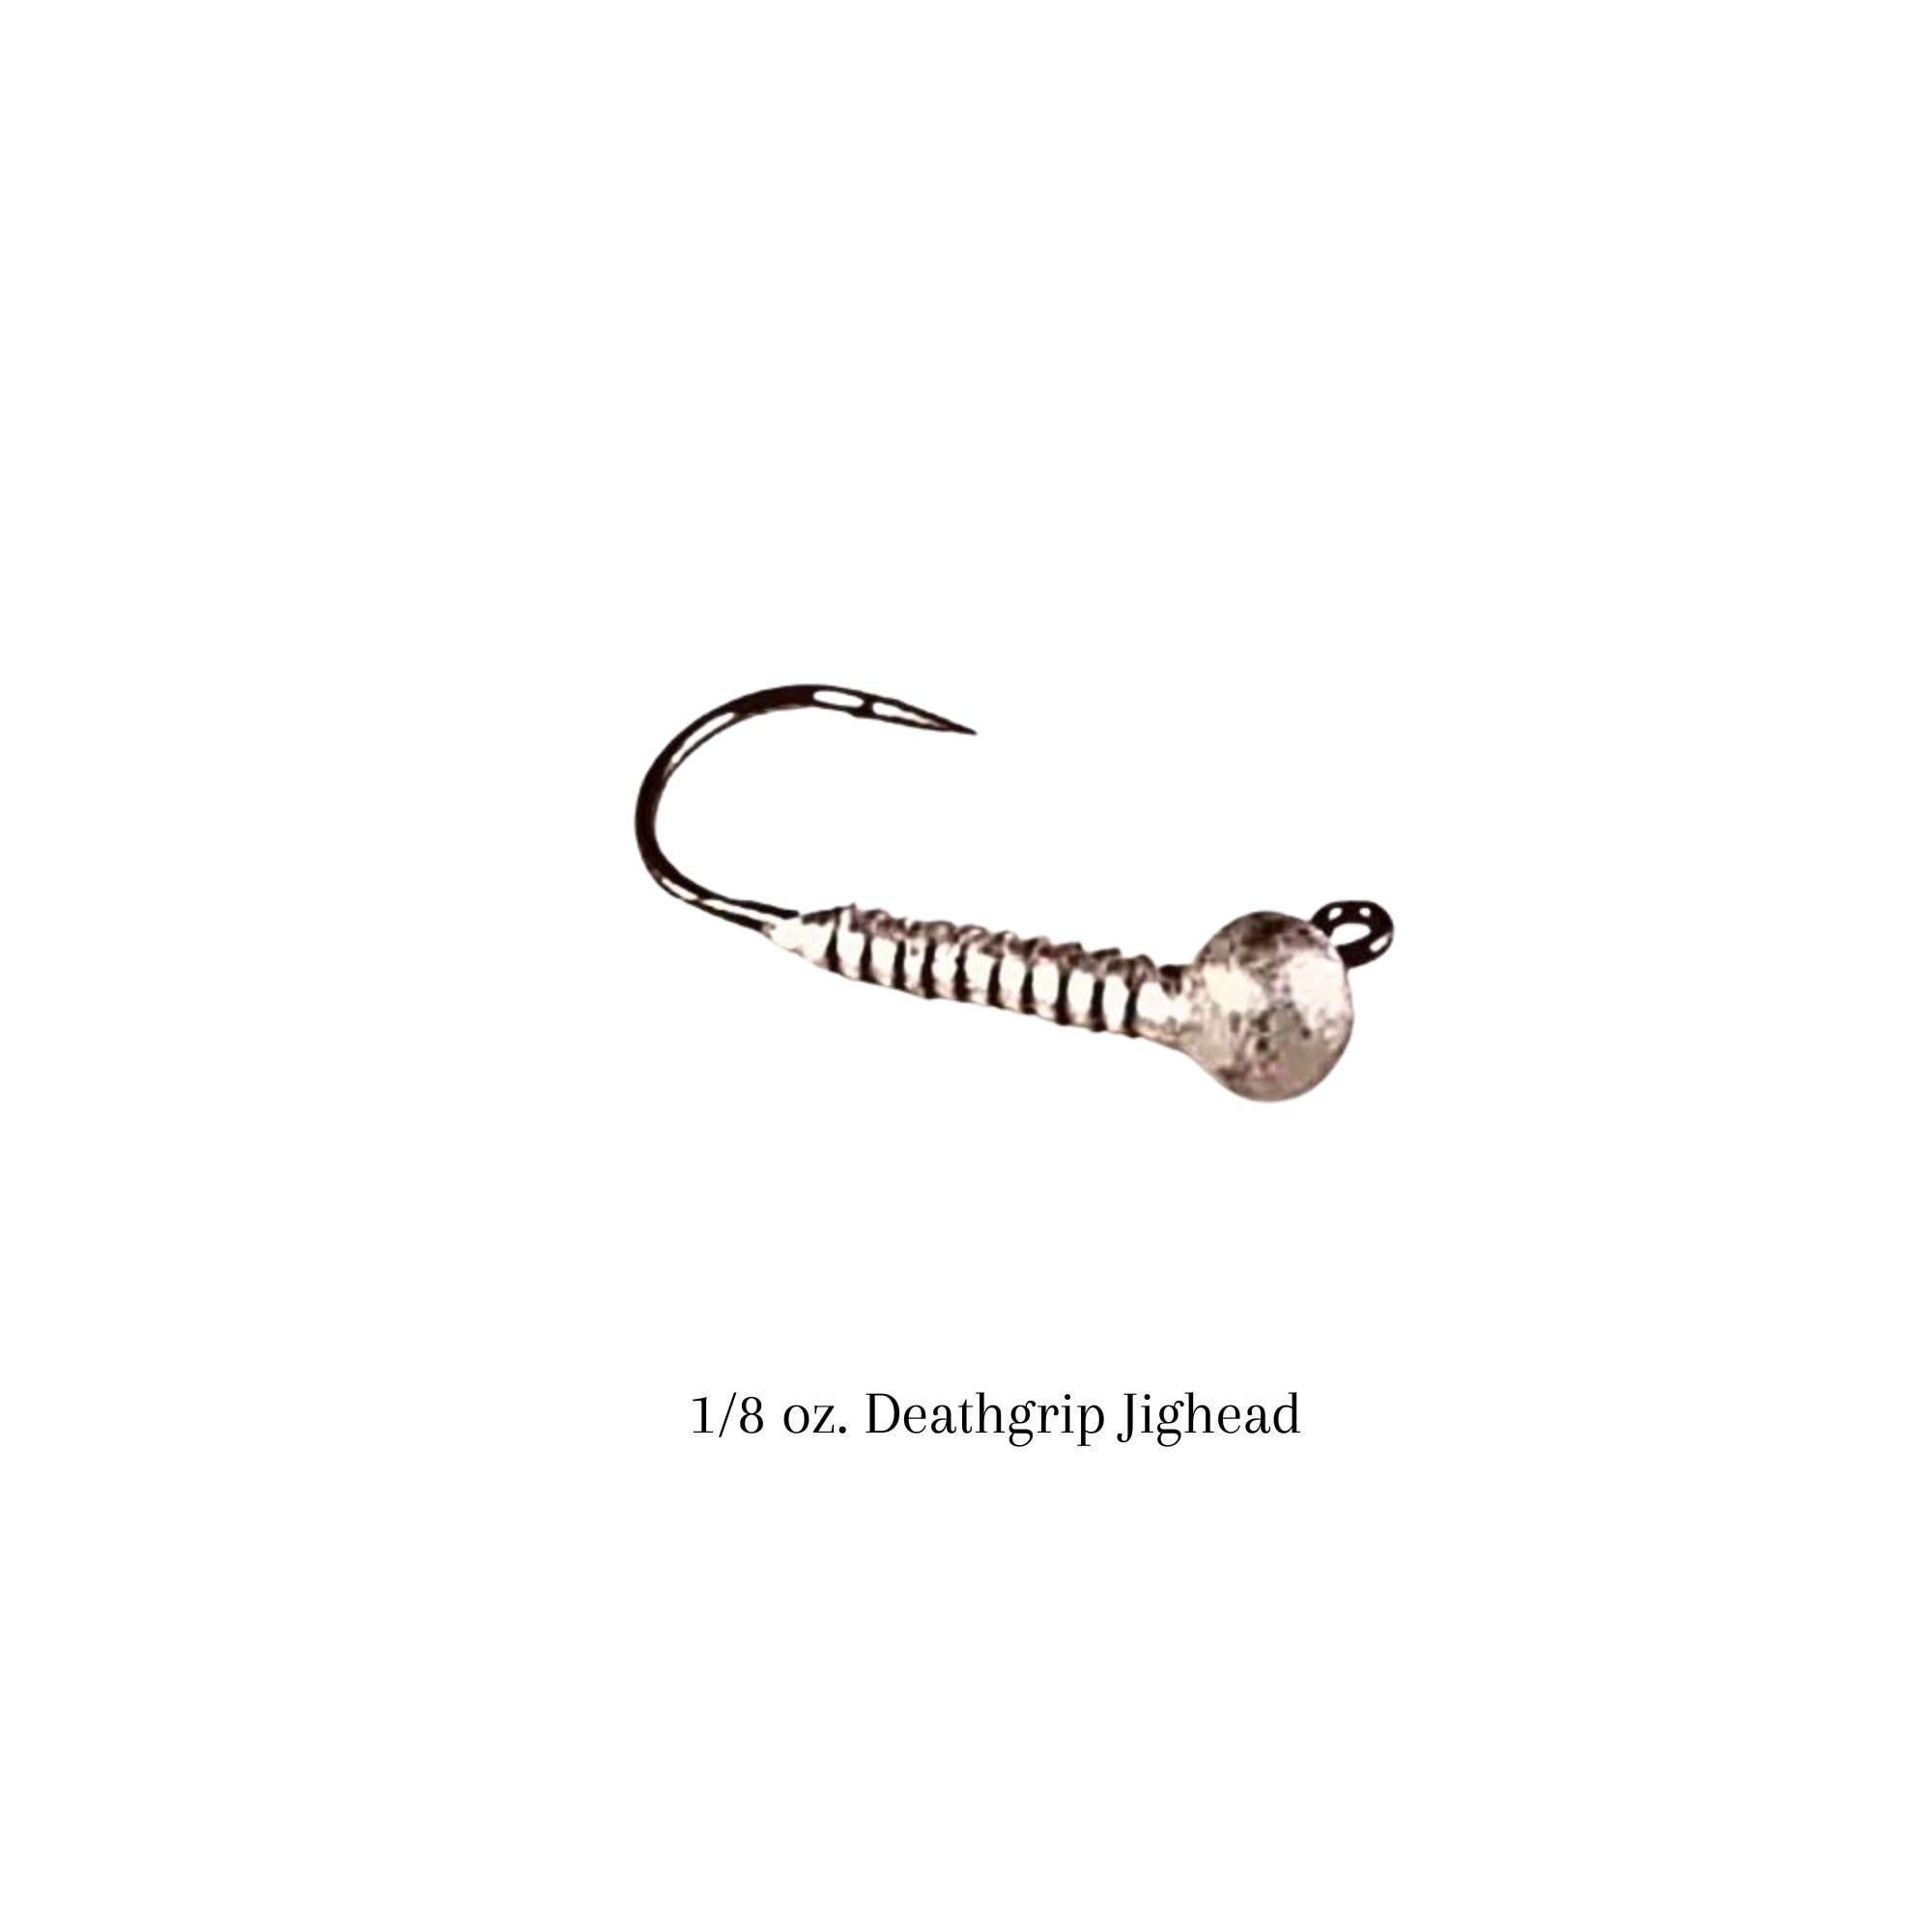 Deathgrip JigHeads, 5 pack, Fishing Hooks, Tackle, Fishing Store